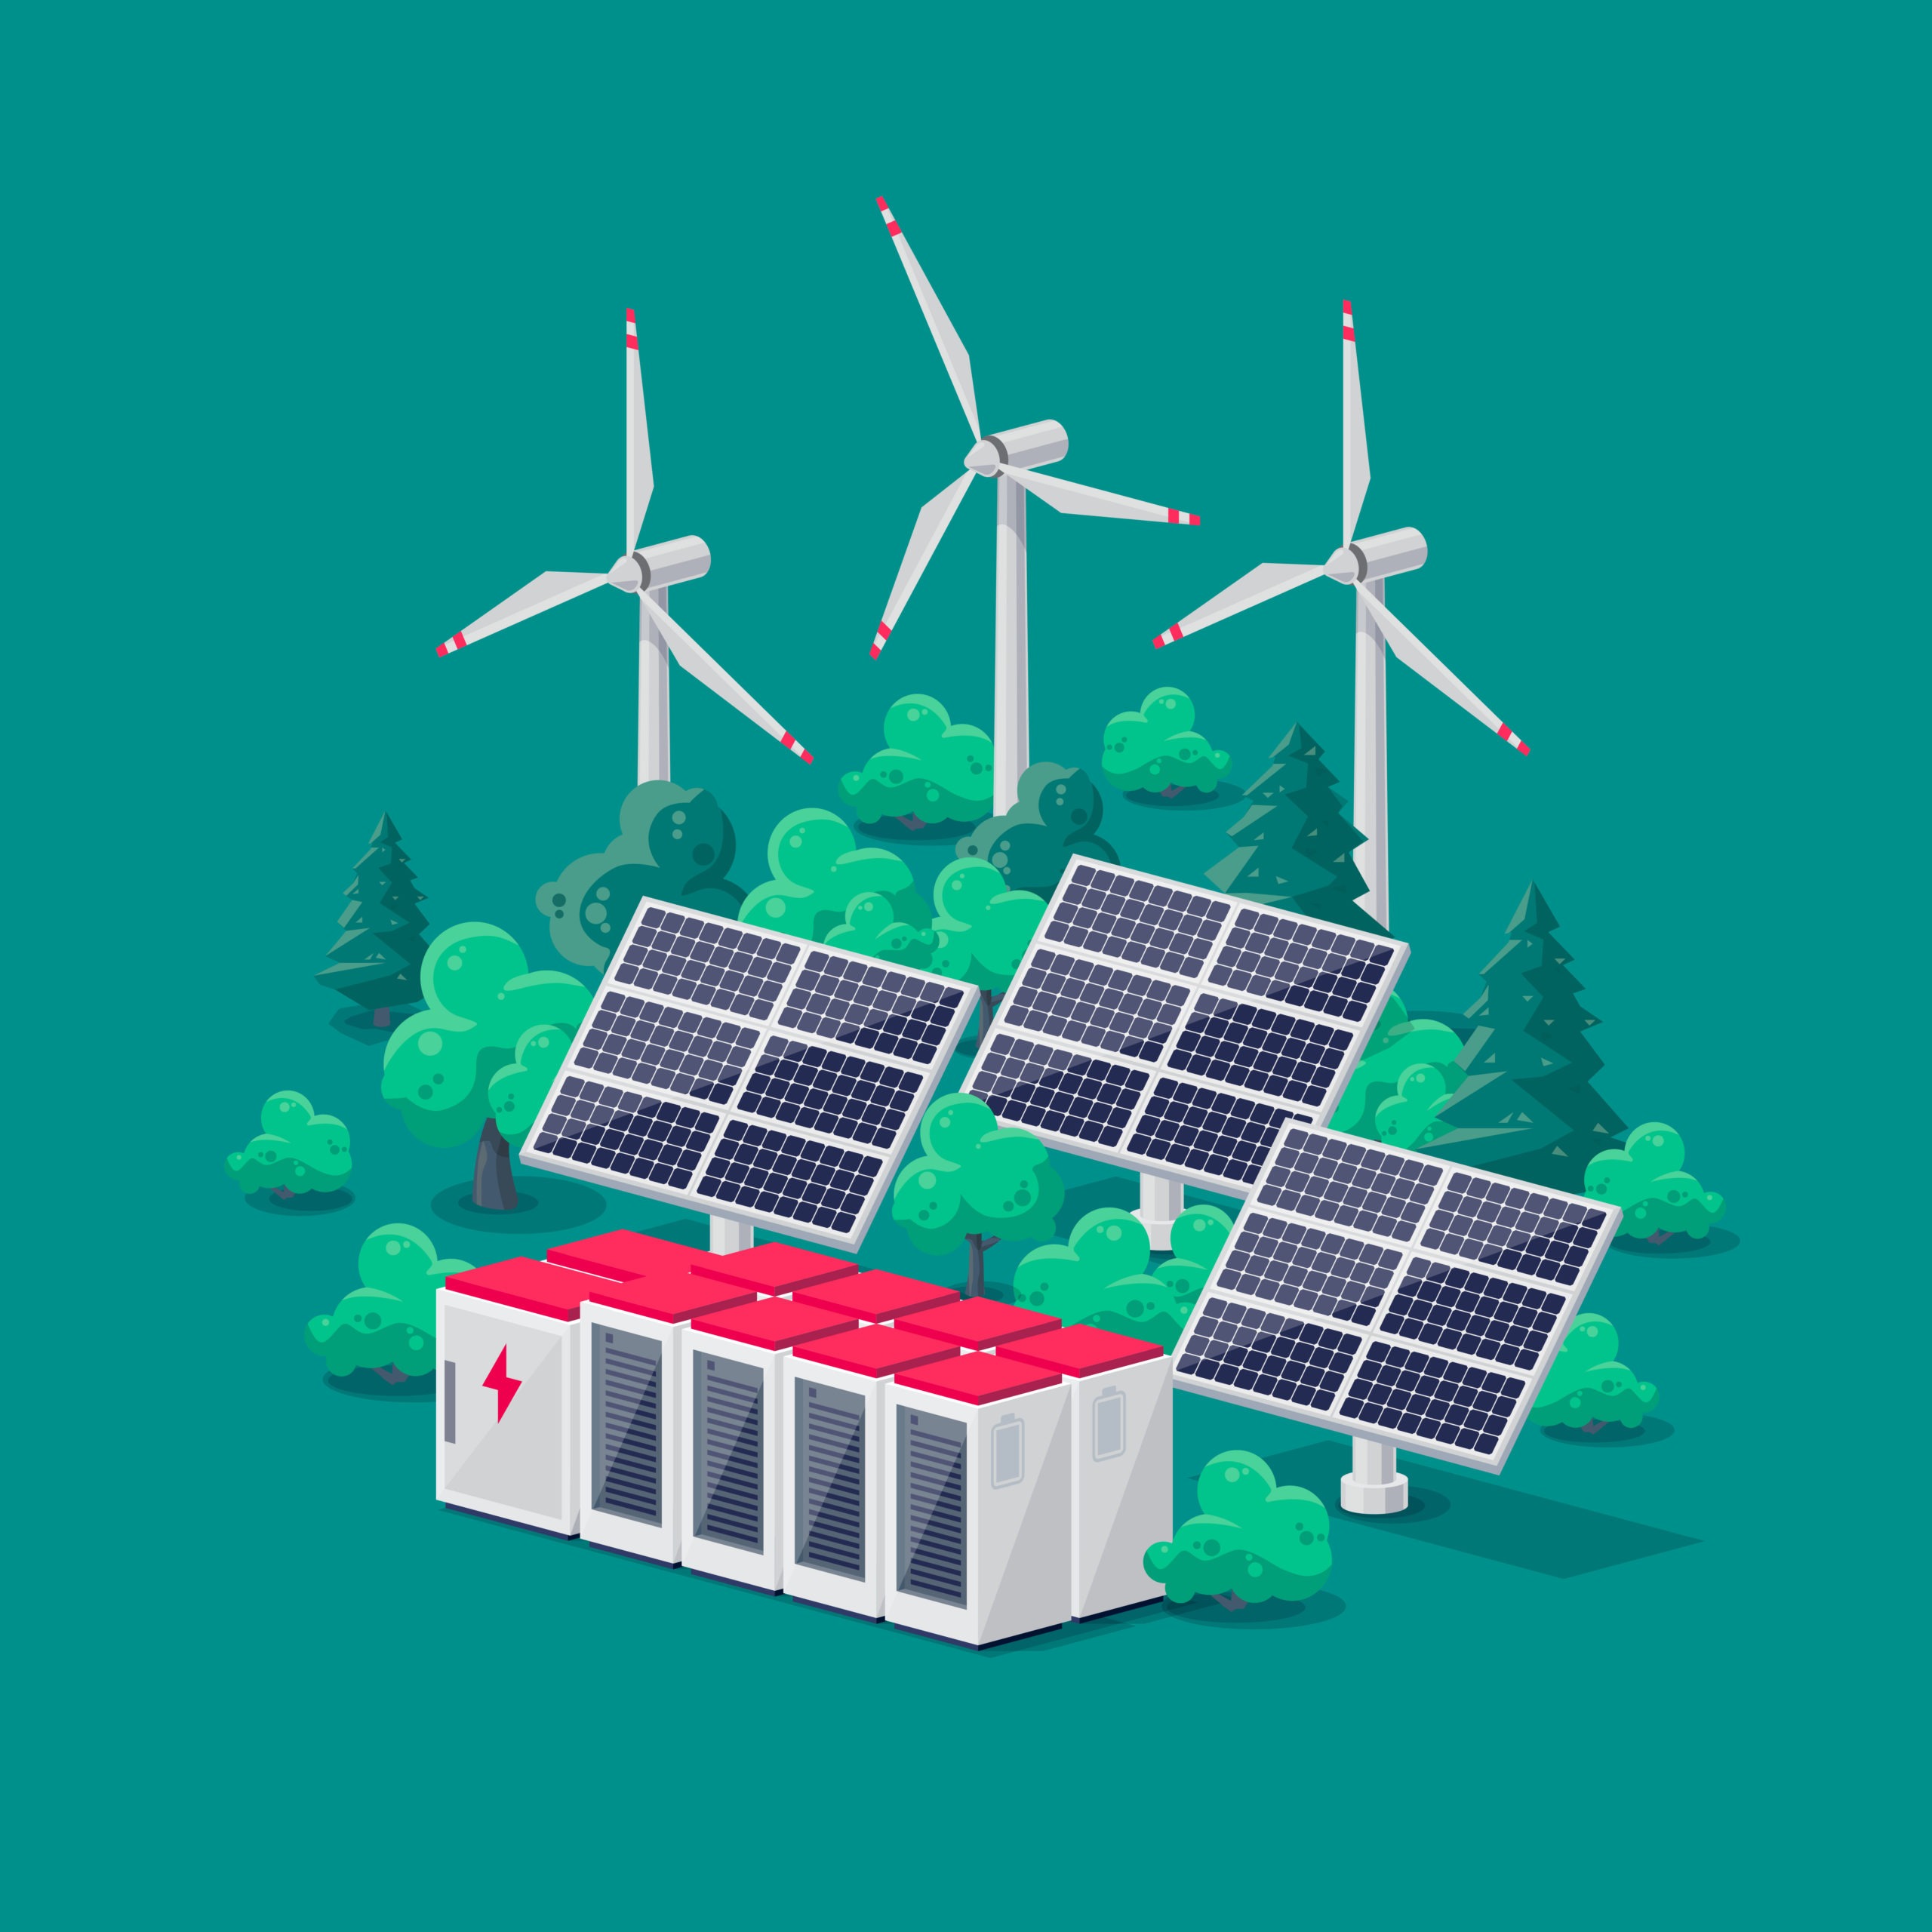 Renewable energy electric power station smart grid system. Flat vector illustration of photovoltaic solar panels, wind turbines and rechargeable lithium-ion battery energy storage for off-grid backup.